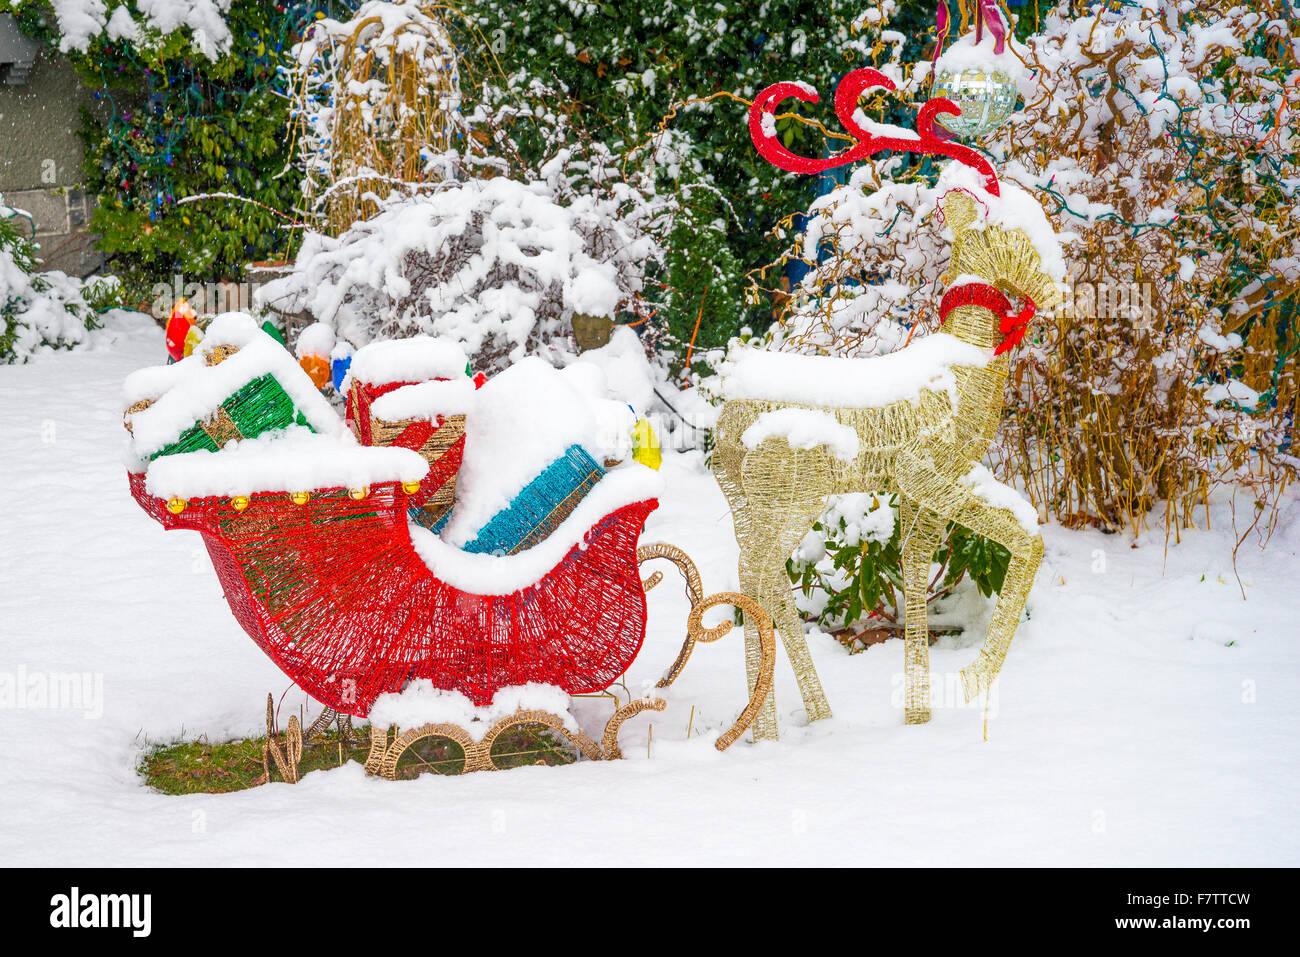 Reindeer and sleigh with presents, outdoor Christmas decoration Stock Photo